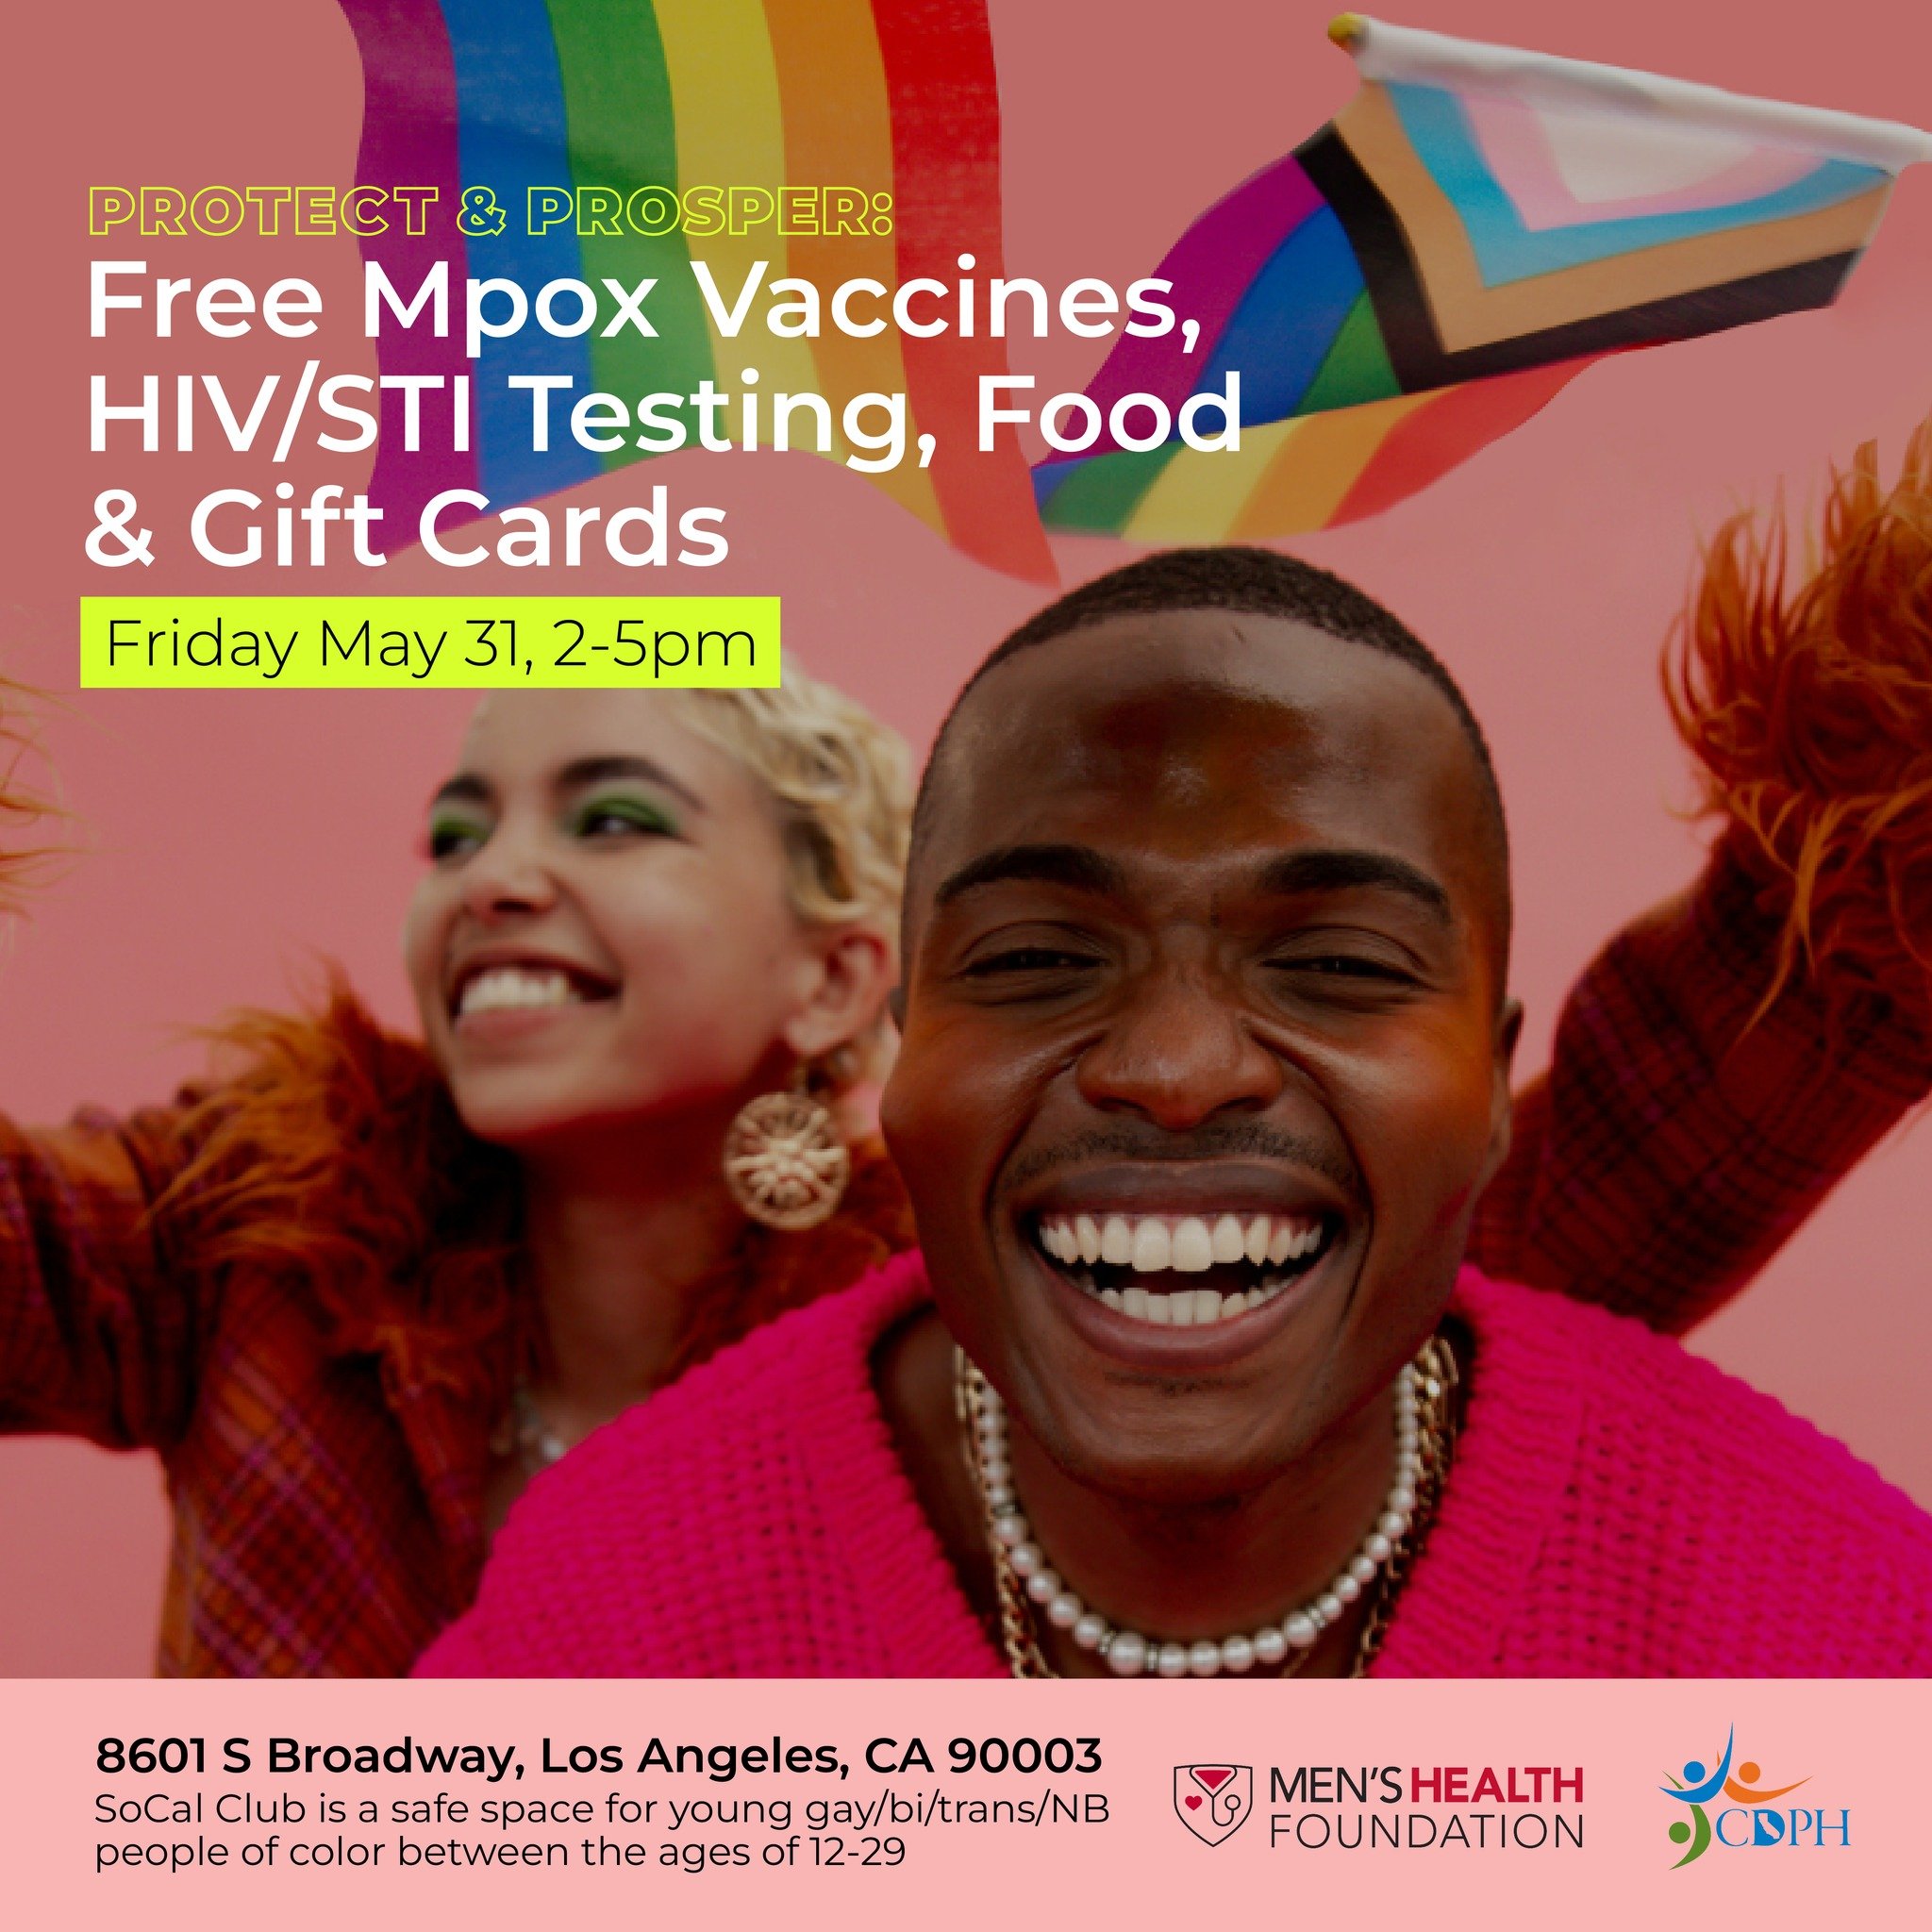 With monkeypox on the rise, it's not a bad idea to get vaccinated! Come get vaxxed and enjoy tacos with us in two weeks! ❤️

#mpox #mpoxvaxxed #tested #STIs #HIVtesting #socalclub #southla #gaysouthla #food #tacos